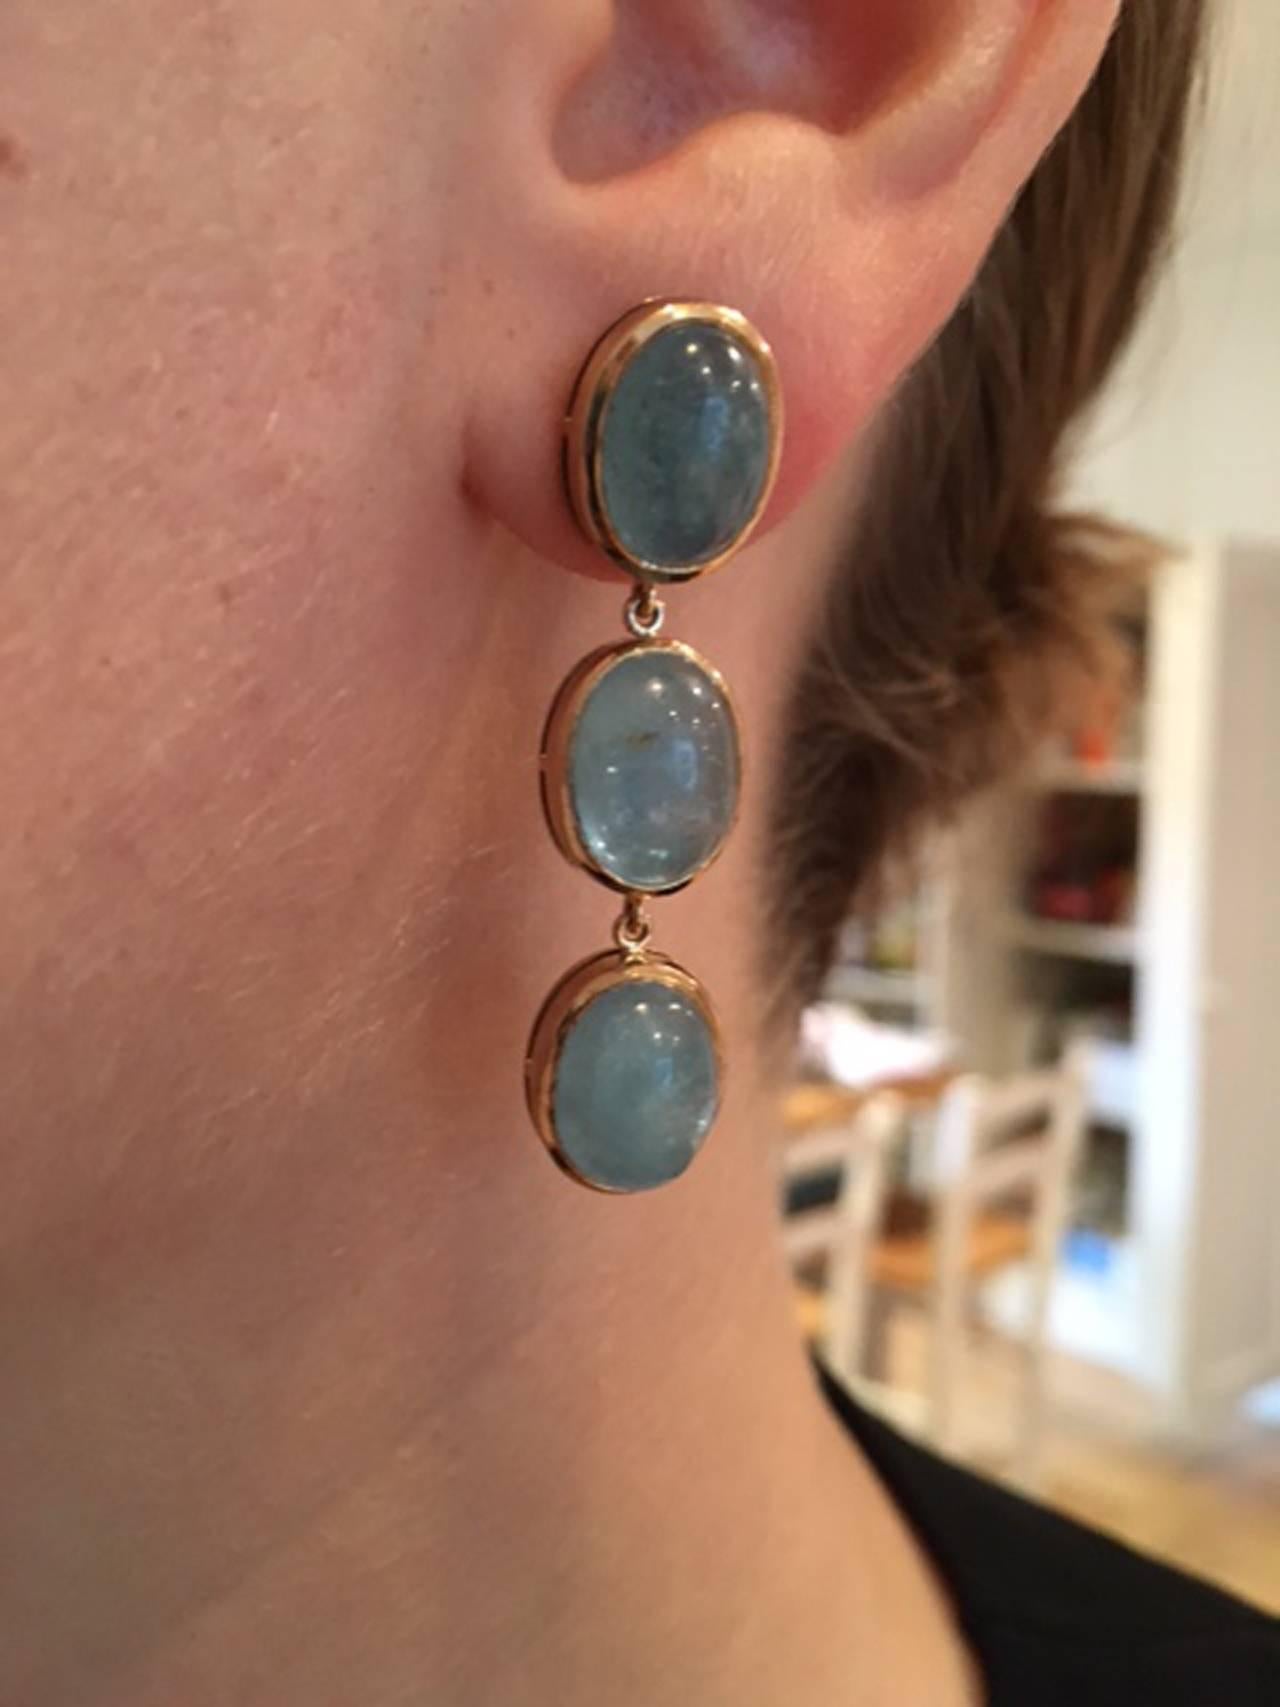 Three stone Aquamarine drop earrings set in rub-over style in 9kt yellow gold.
Size 4.3 x 8 mm.  Stones 11 x 9 mm.  These are post settings.